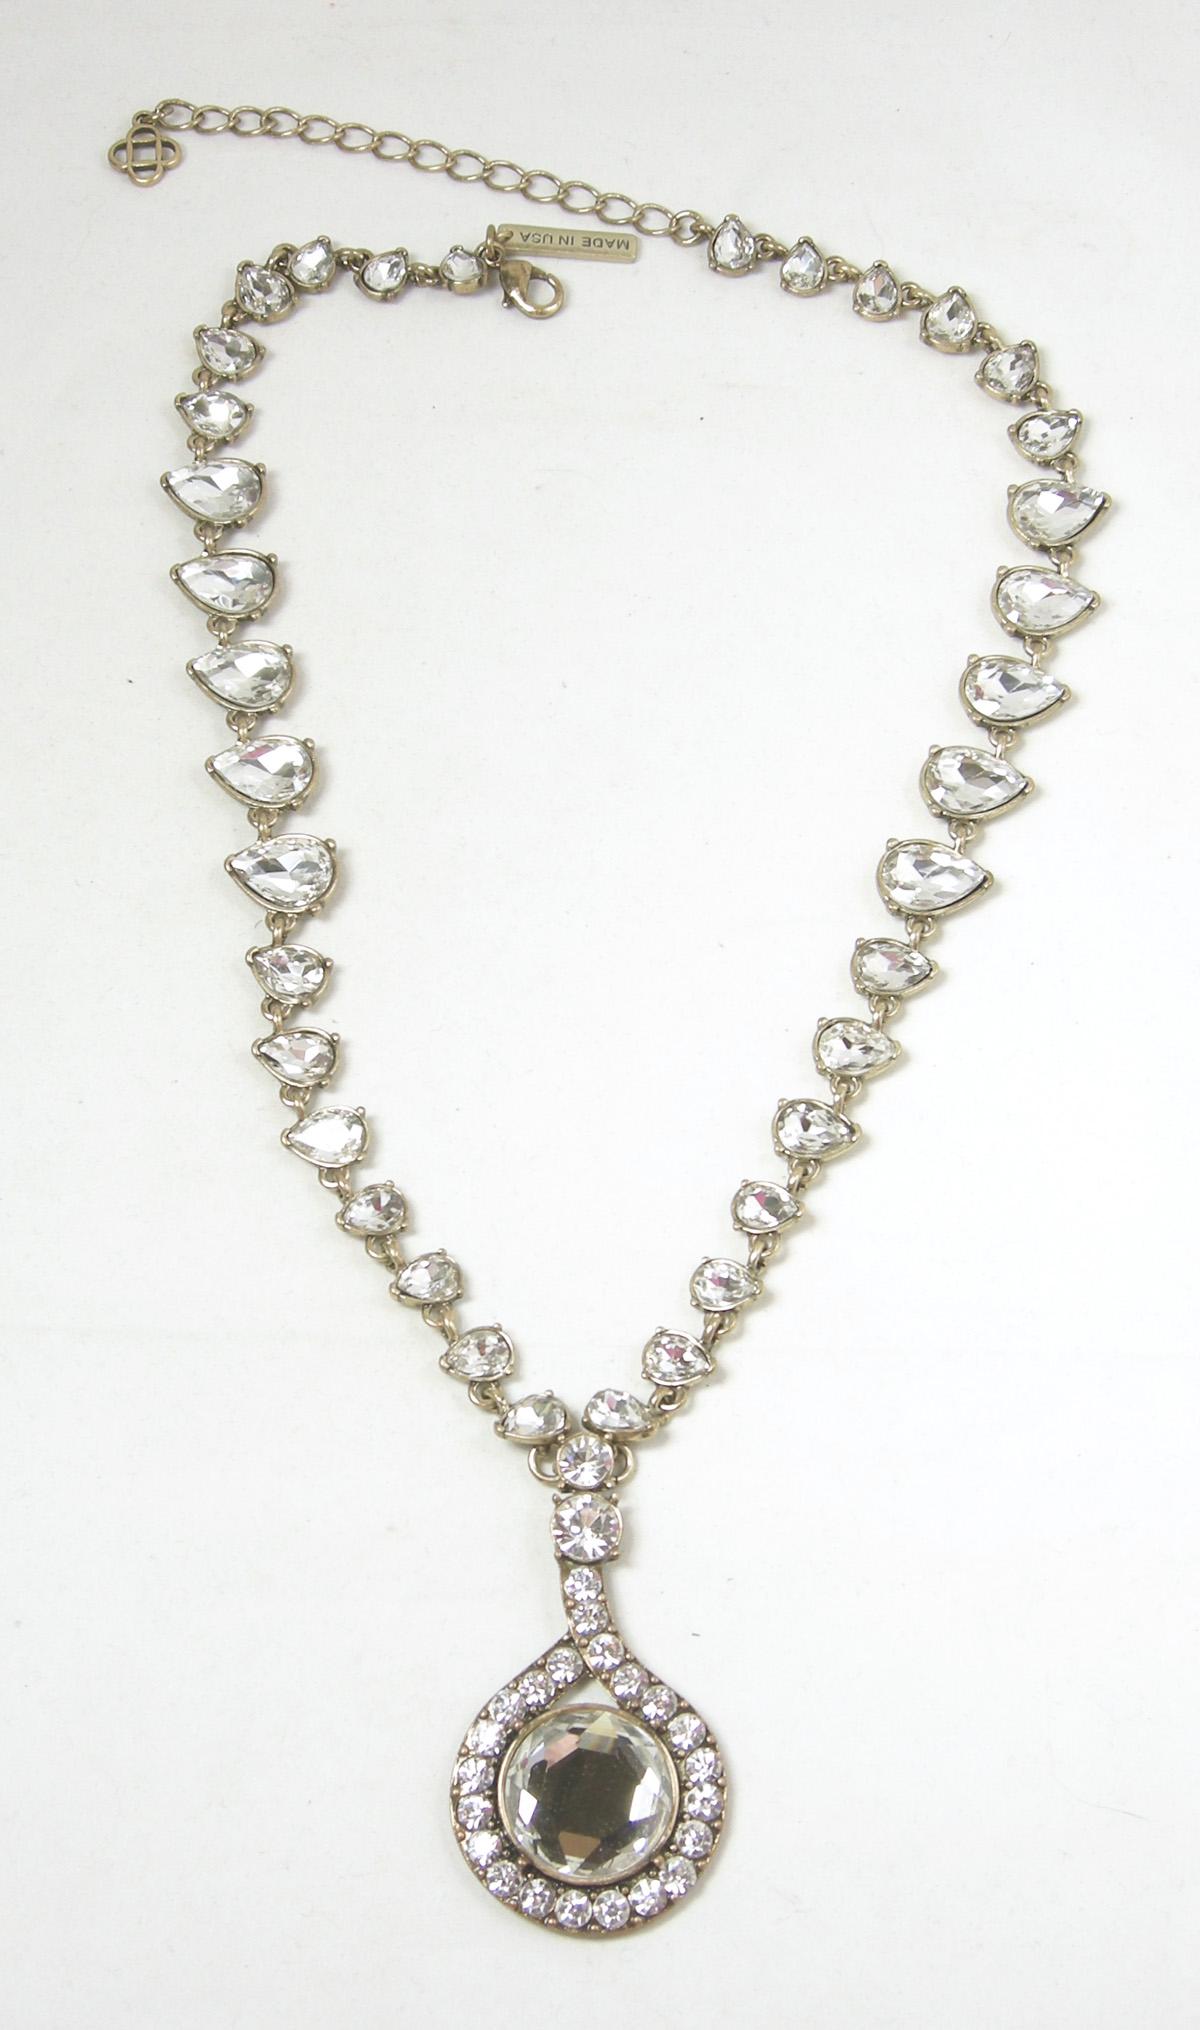 This sophisticated Oscar de la Renta necklace has clear crystals in a gold tone metal leading down to large crystal drop.  The necklace is adjustable up to 22”.  The centerpiece is 2-1/2” x 1-1/2”.  It is signed “Oscar de la Renta” and “Made in USA”